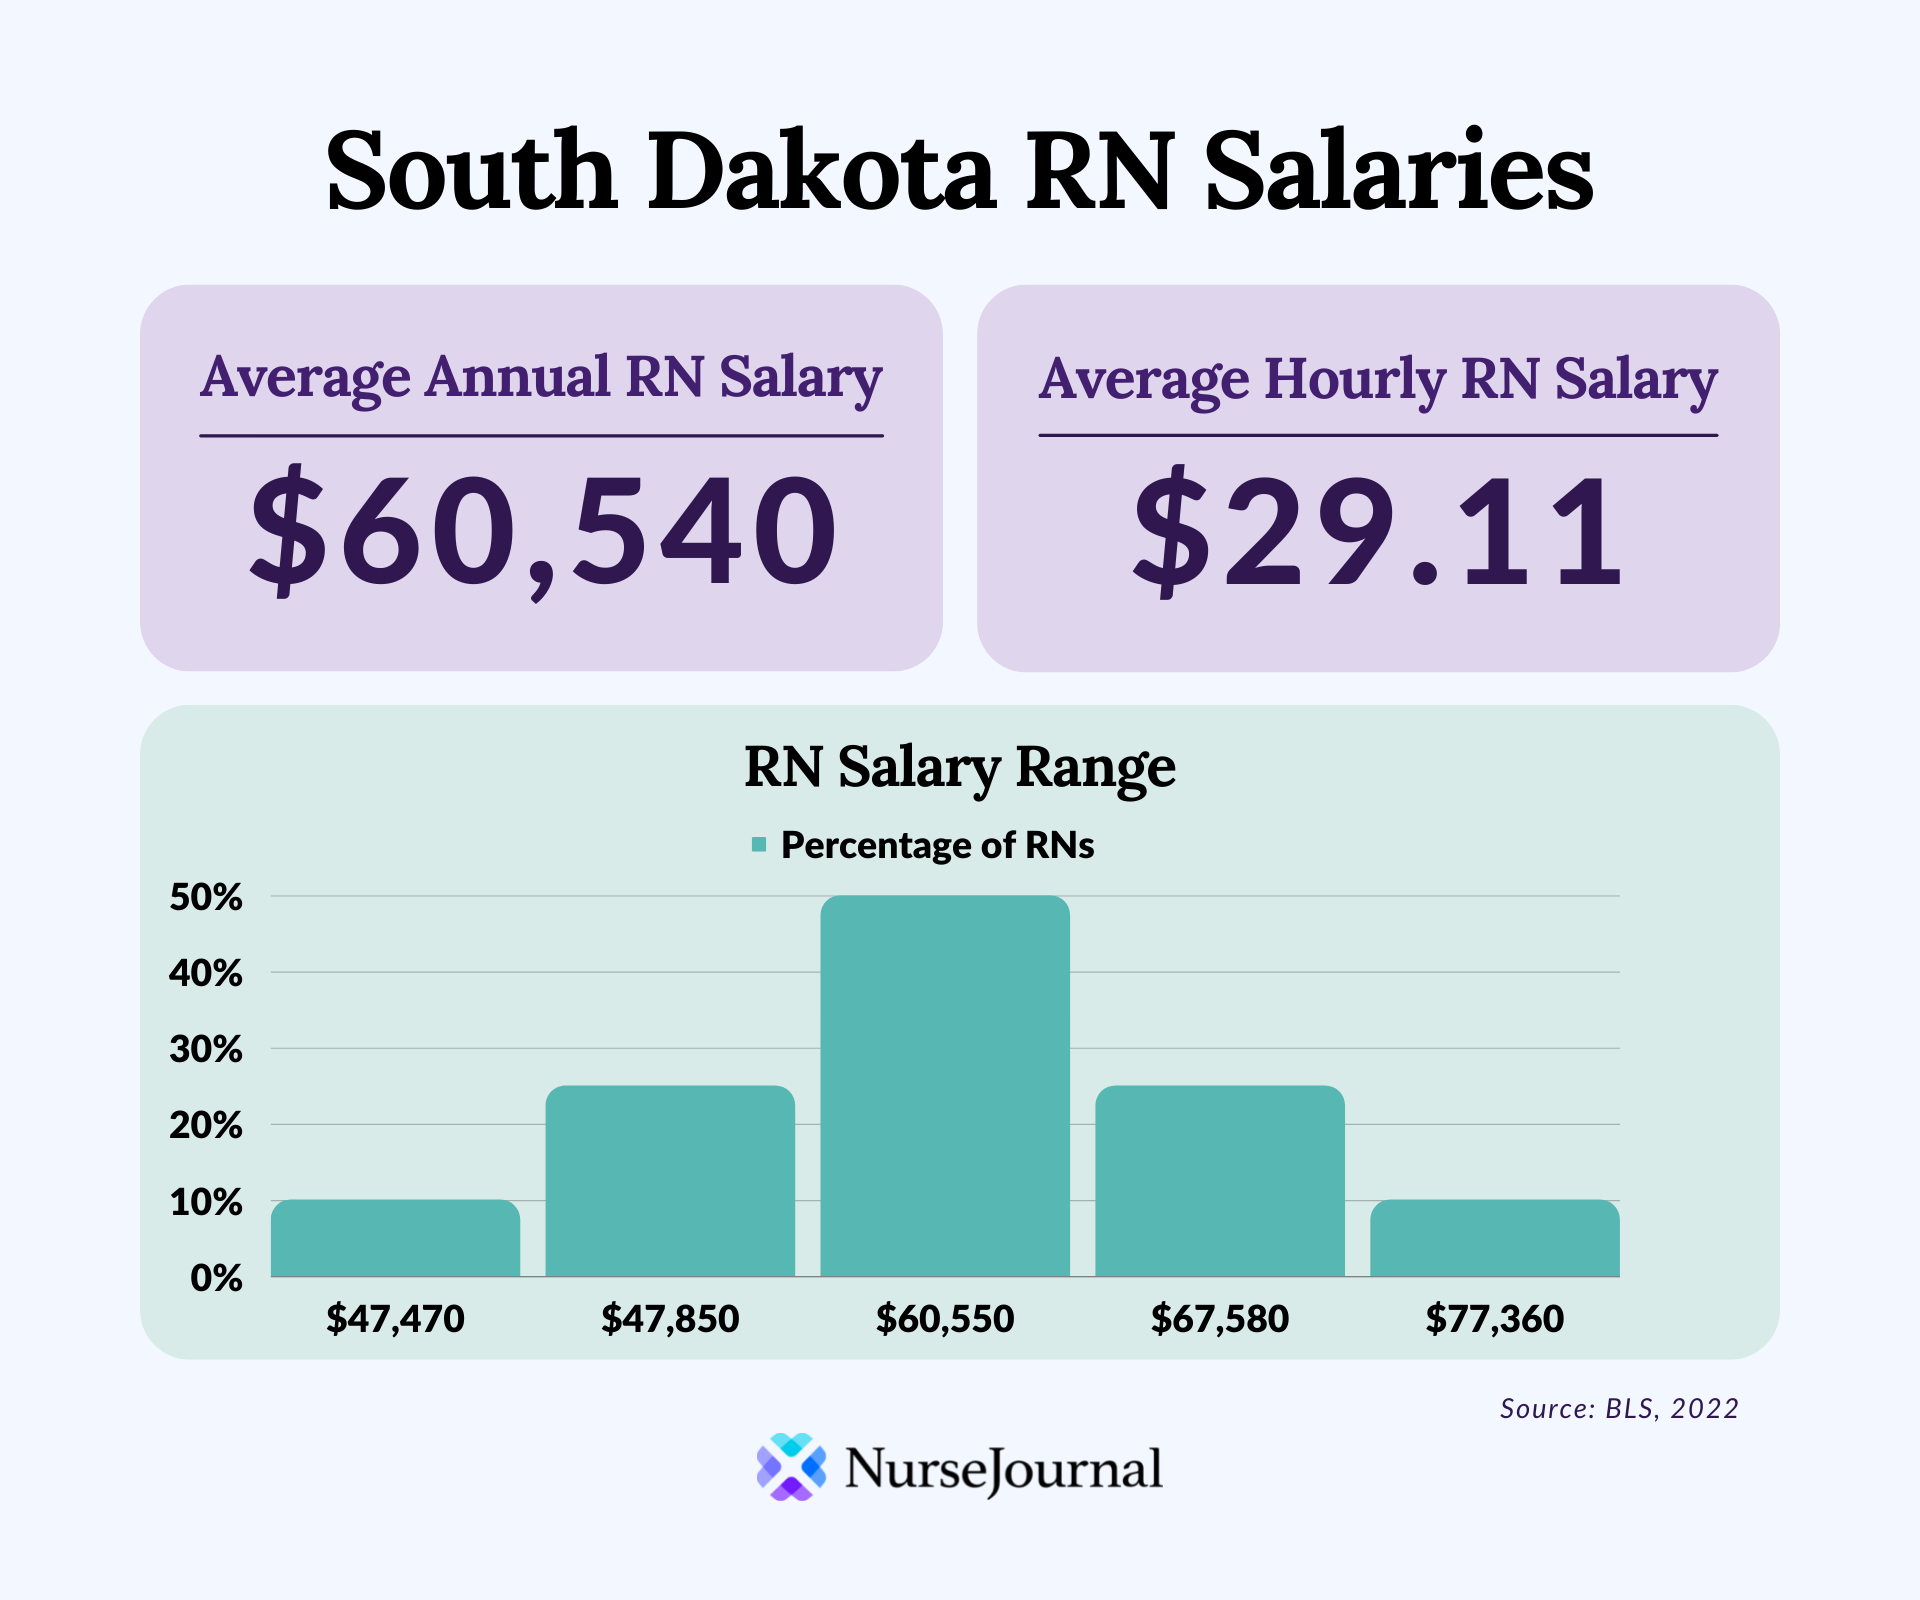 Infographic of registered nursing salary data in South Dakota. The average annual RN salary is $60,540. The average hourly RN salary is $29.11. Average RN salaries range from $47,470 among the bottom 10th percentile of earners to $77,360 among the top 90th percentile of earners.